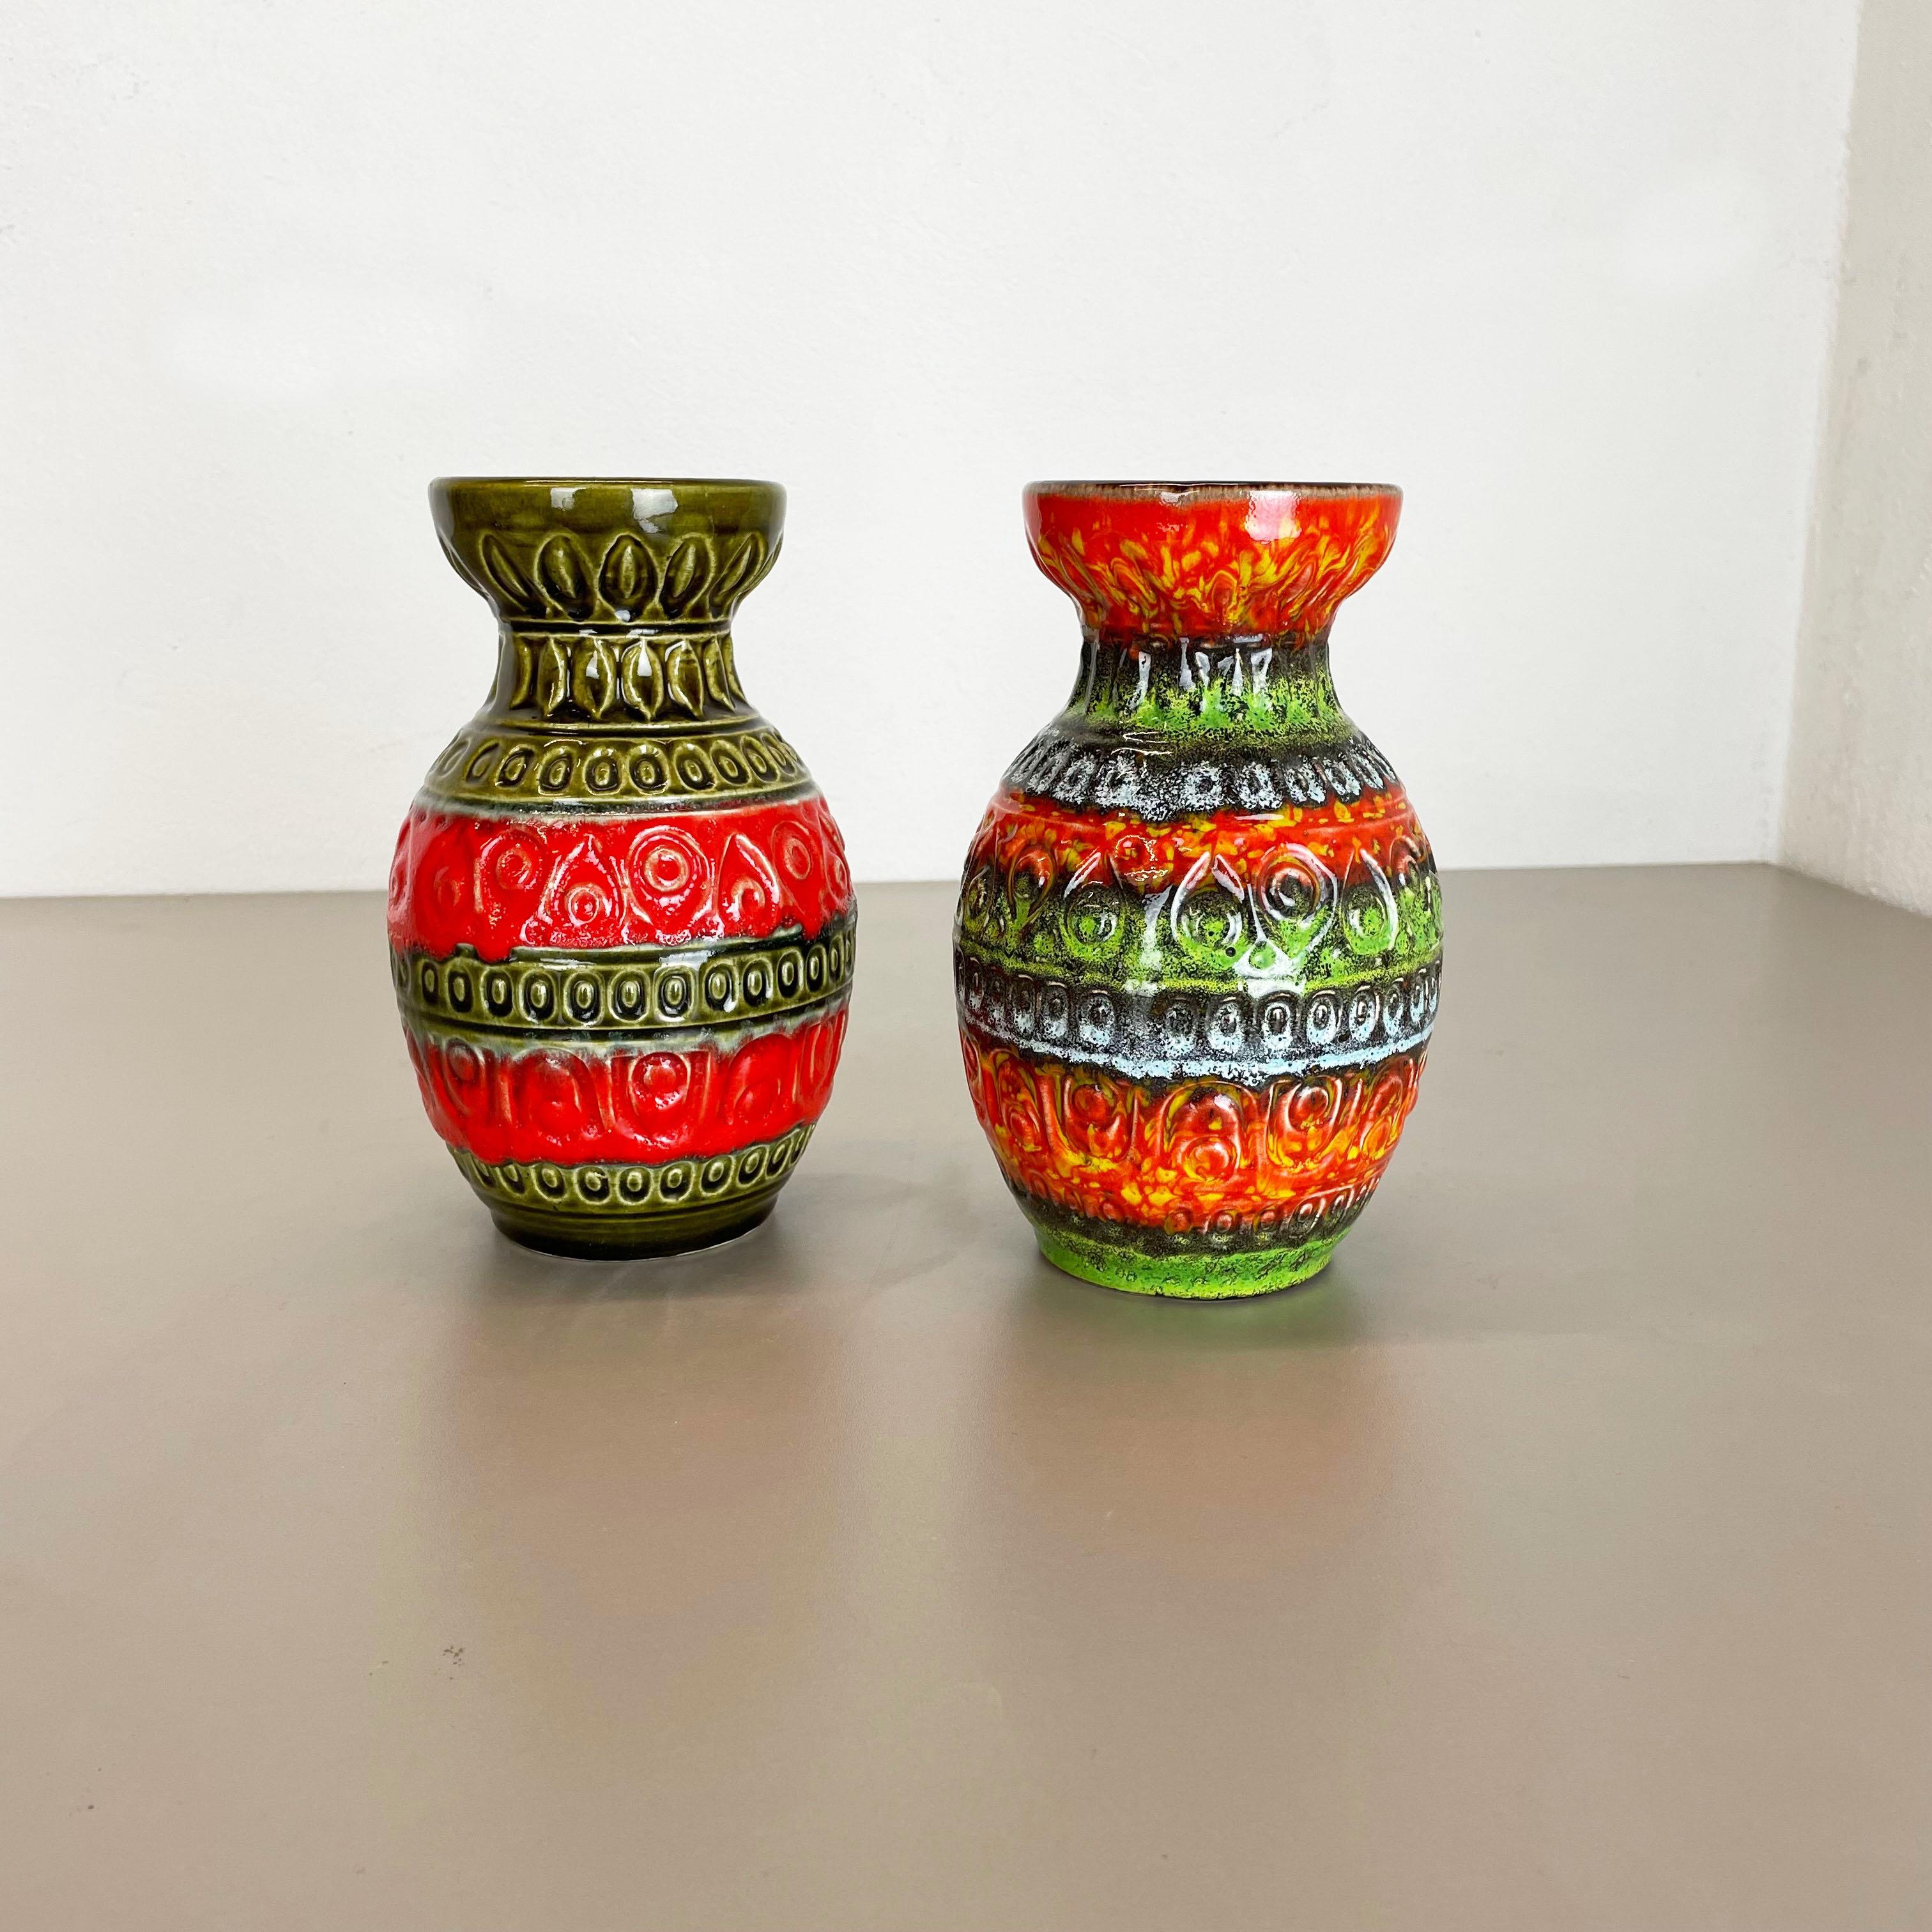 Article:

Pottery ceramic vase set of 2


Producer:

BAY Ceramic, Germany


Decade:

1970s



Description:

Set of 2 original vintage 1970s pottery ceramic vase made in Germany. High quality German production with a nice abstract